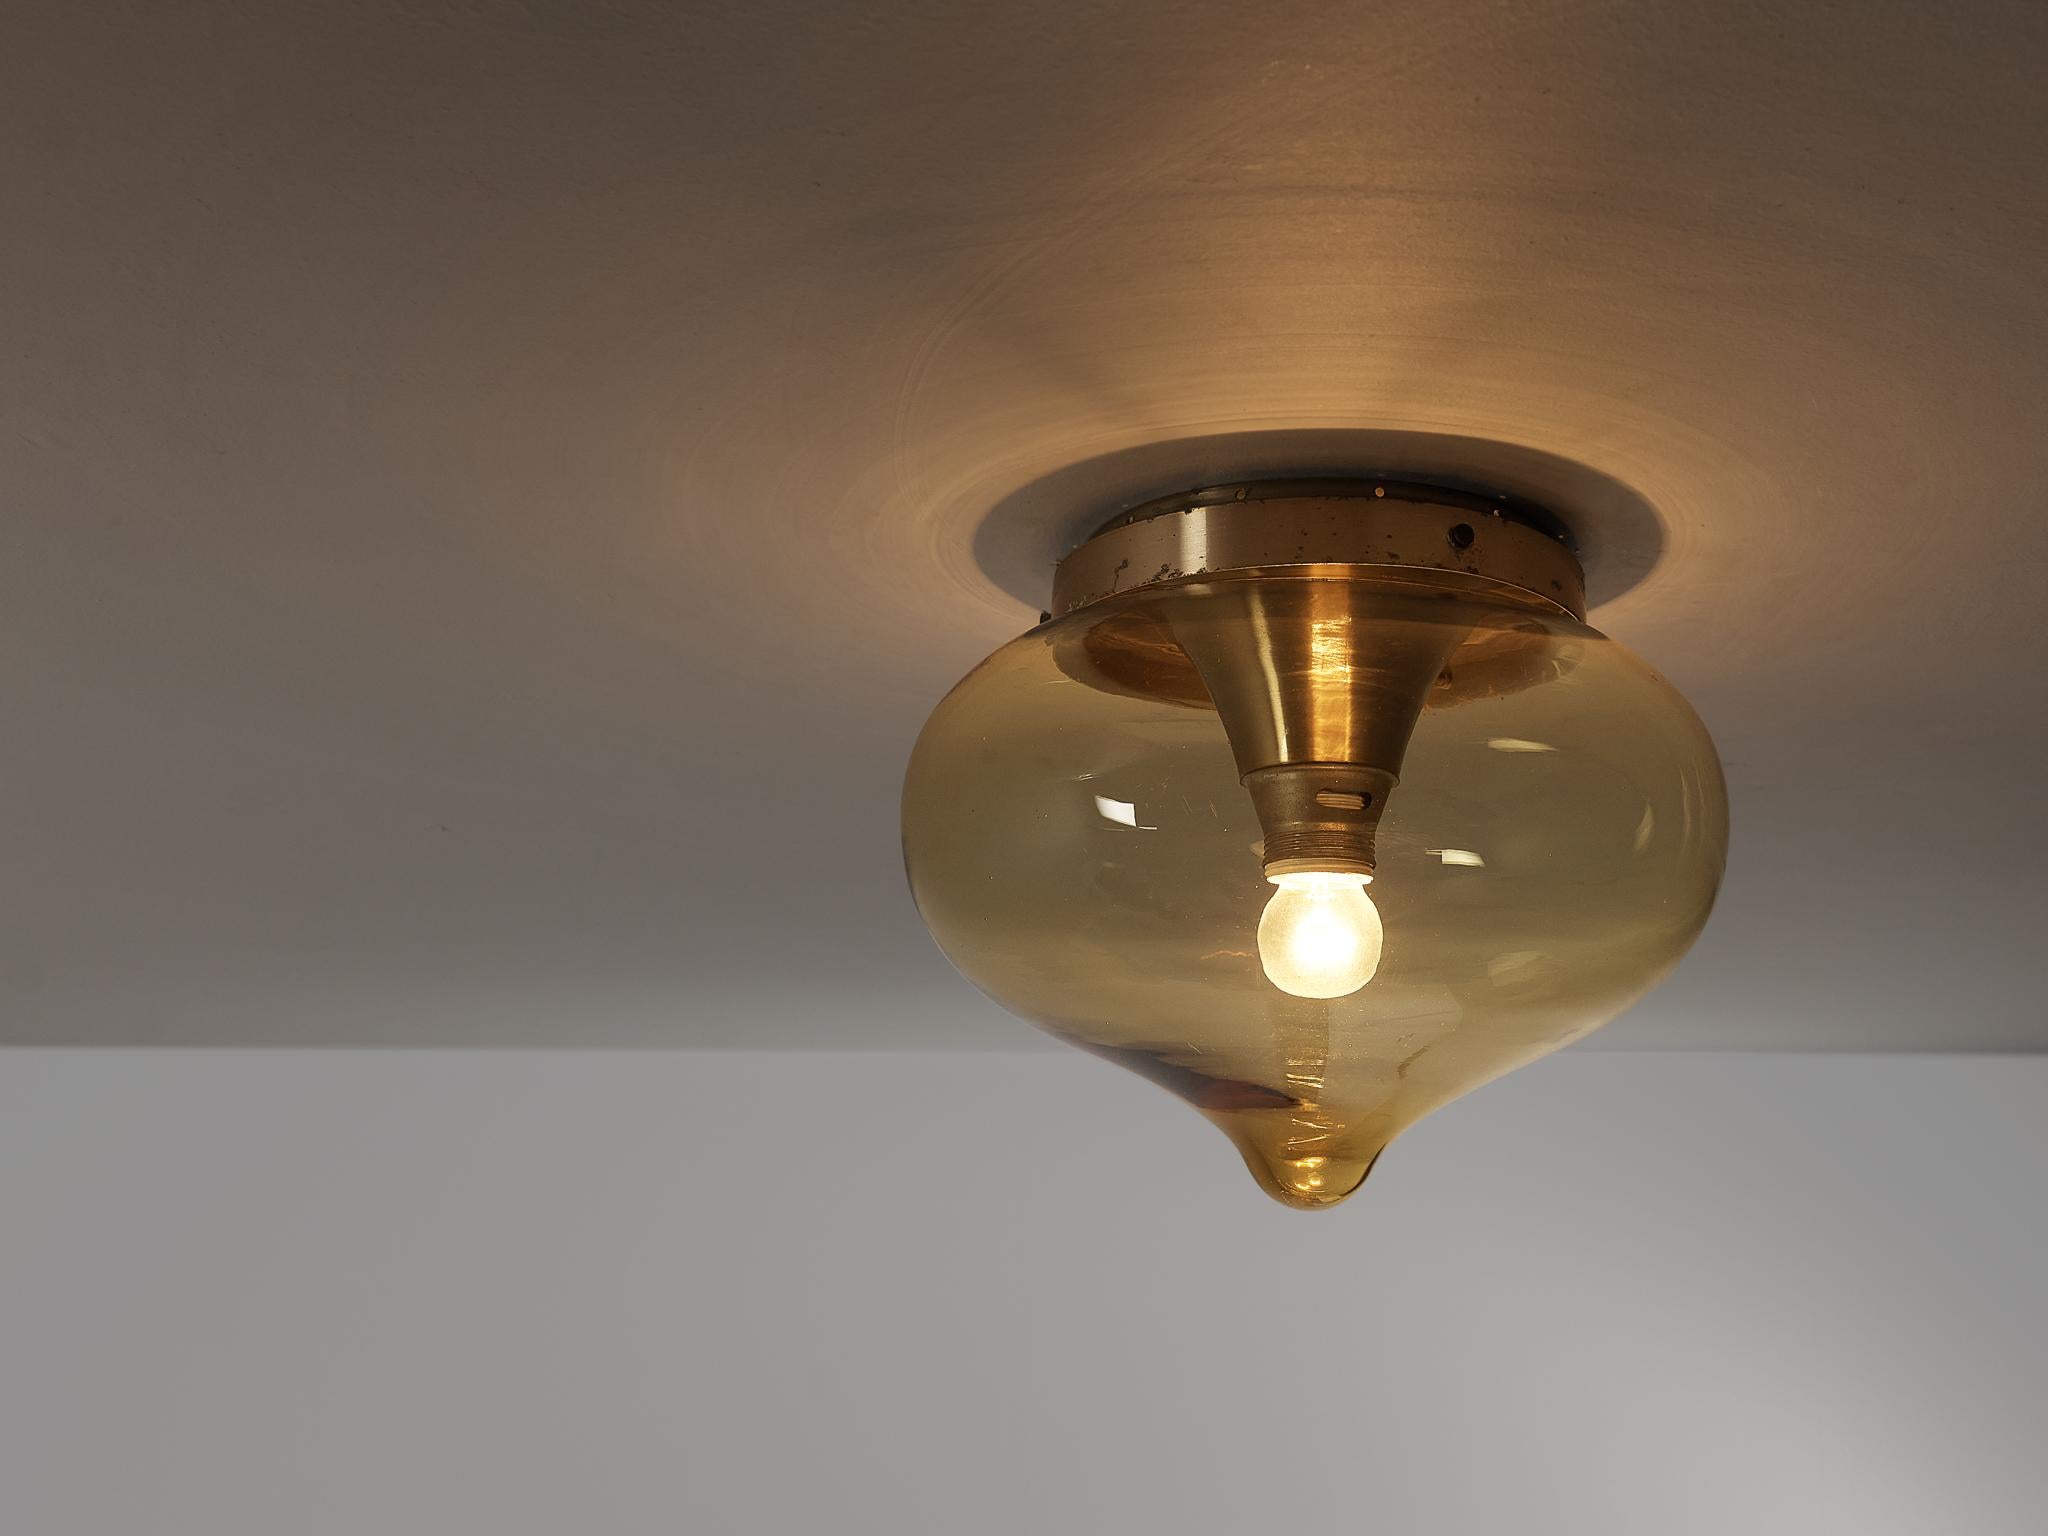 Ceiling light, brass, glass, aluminum, The Netherlands, 1960s

A tear drop shaped glass orb in a golden shade that radiates a warm and diffuse light. The light source reflects on the brass, enlightening the interior in a delightful manner. The